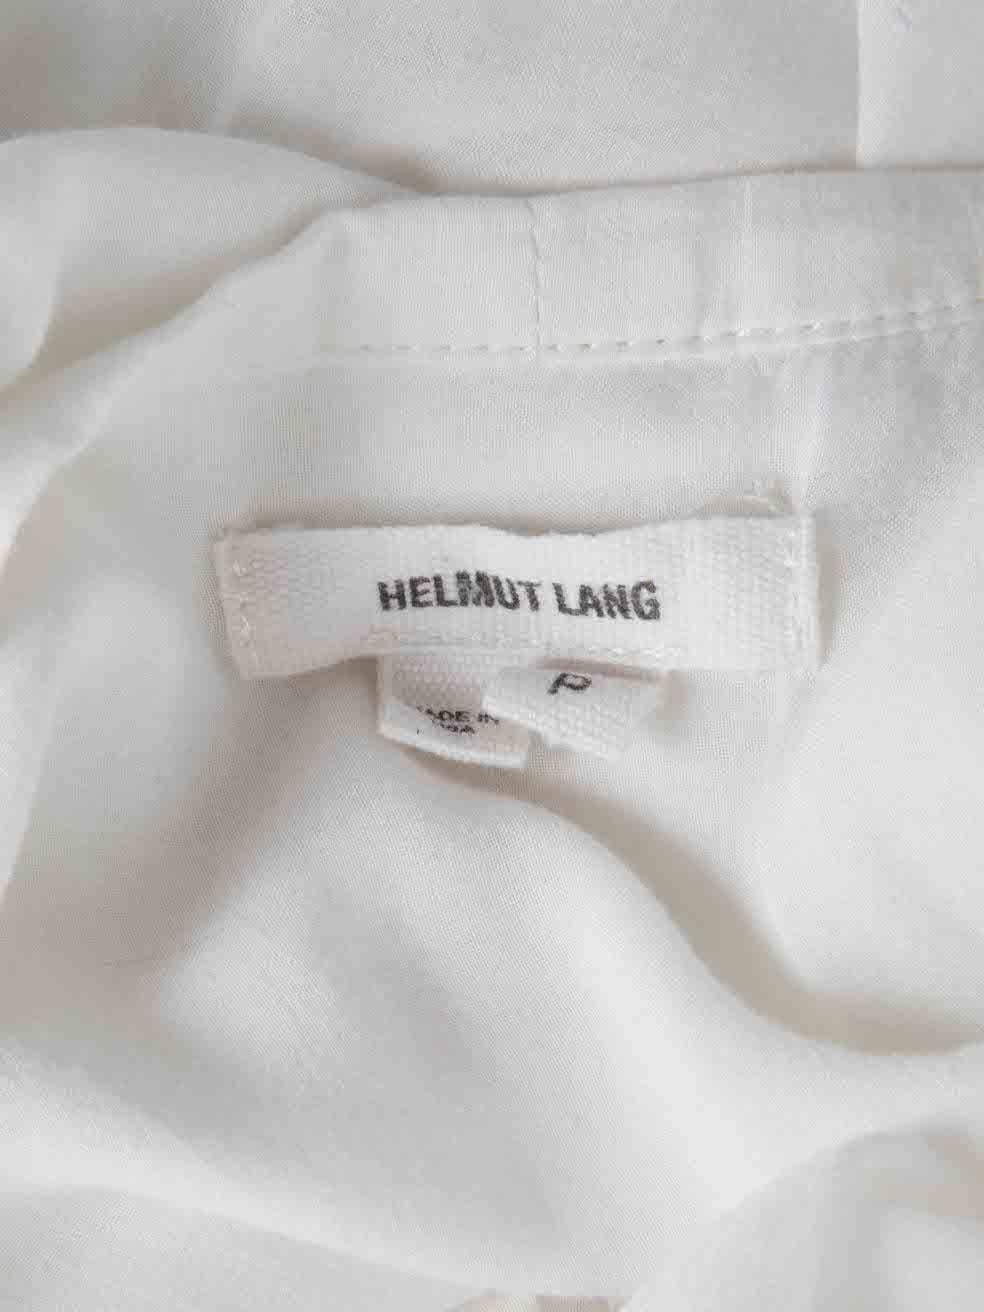 Helmut Lang White Draped Top Size S For Sale 1